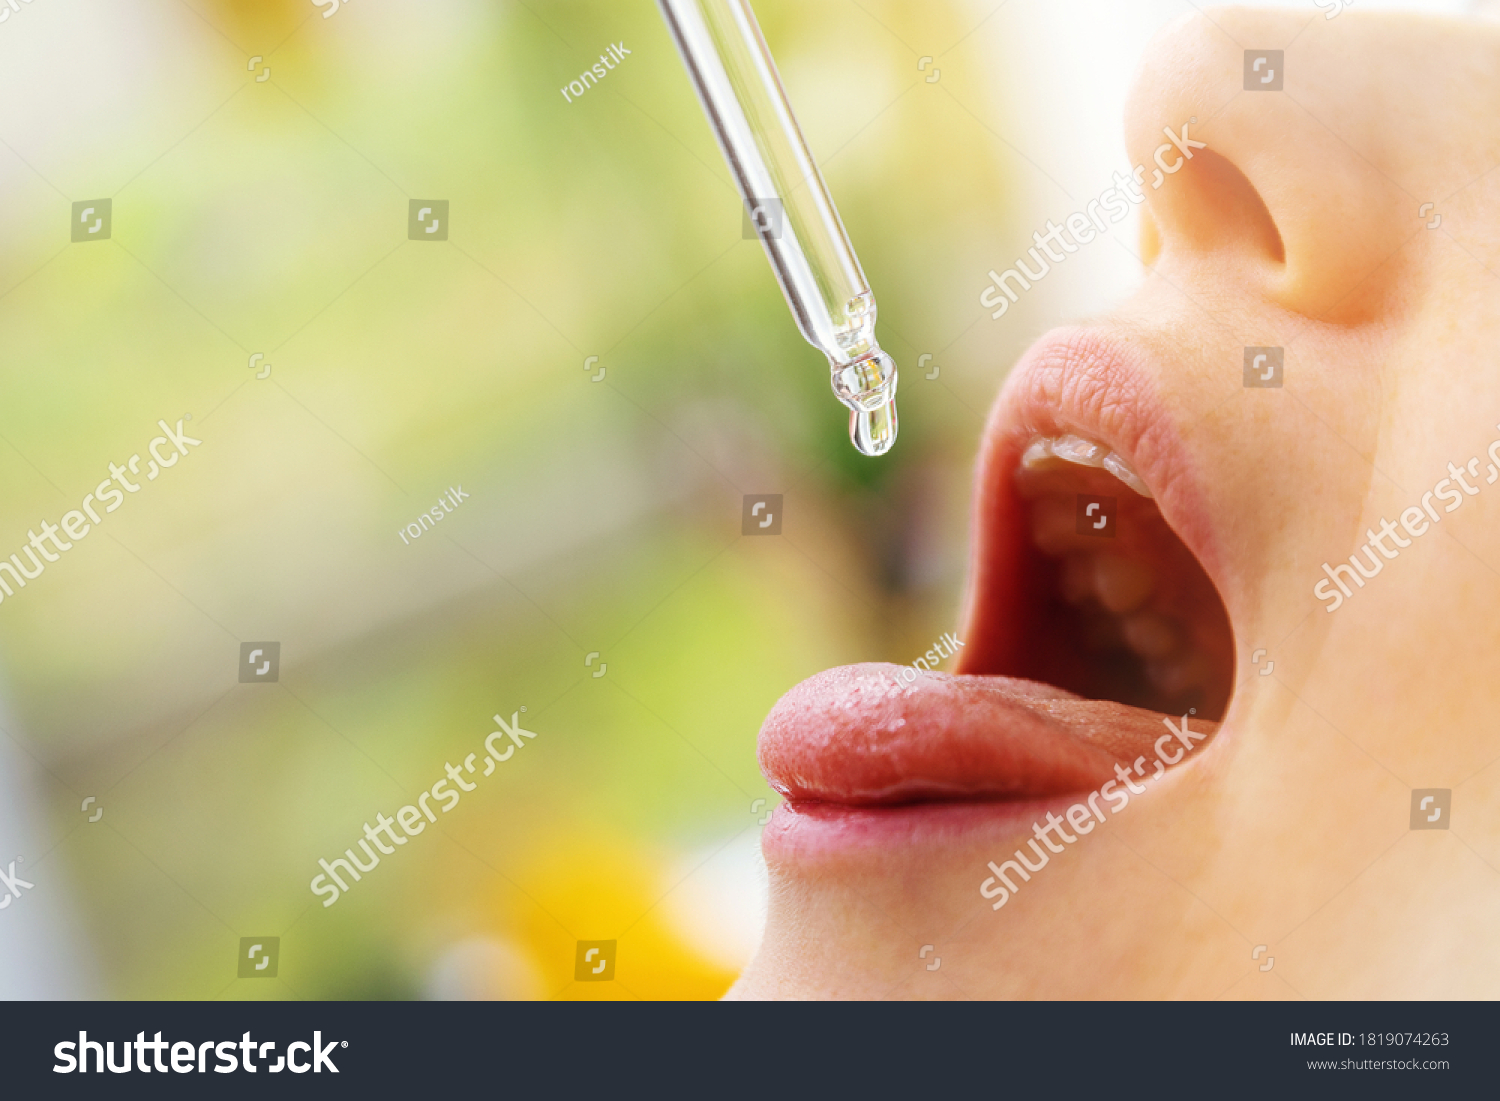 woman taking vitamin d drops in mouth from dropper. copy space #1819074263